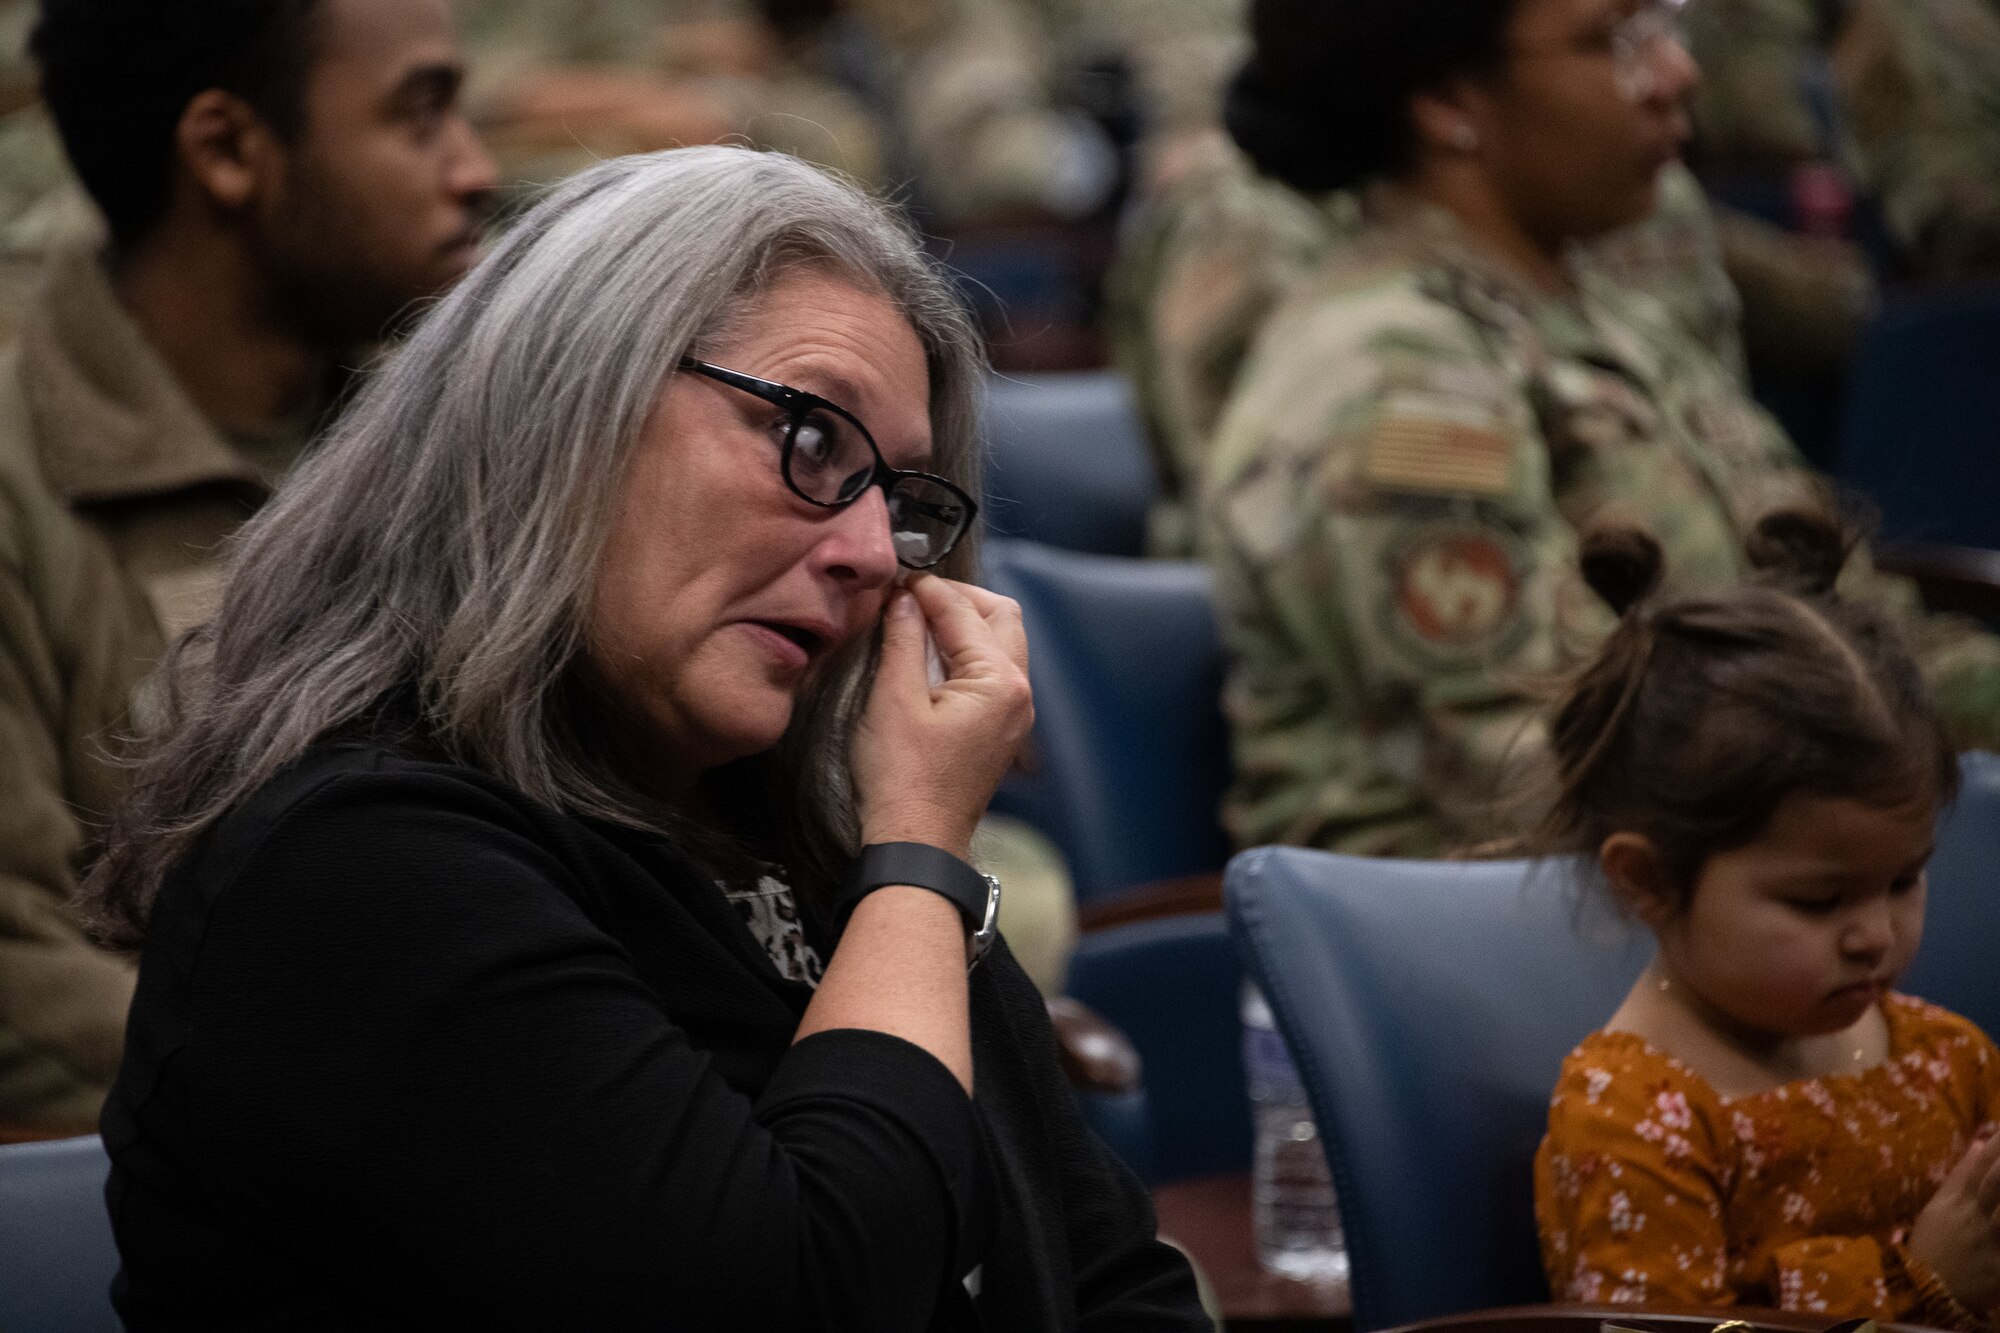 Jackie West, U.S. Air Force Senior Airman Matthew B. West's mother, dries a tear during her son's Airman’s Medal presentation ceremony at Joint Base Andrews.